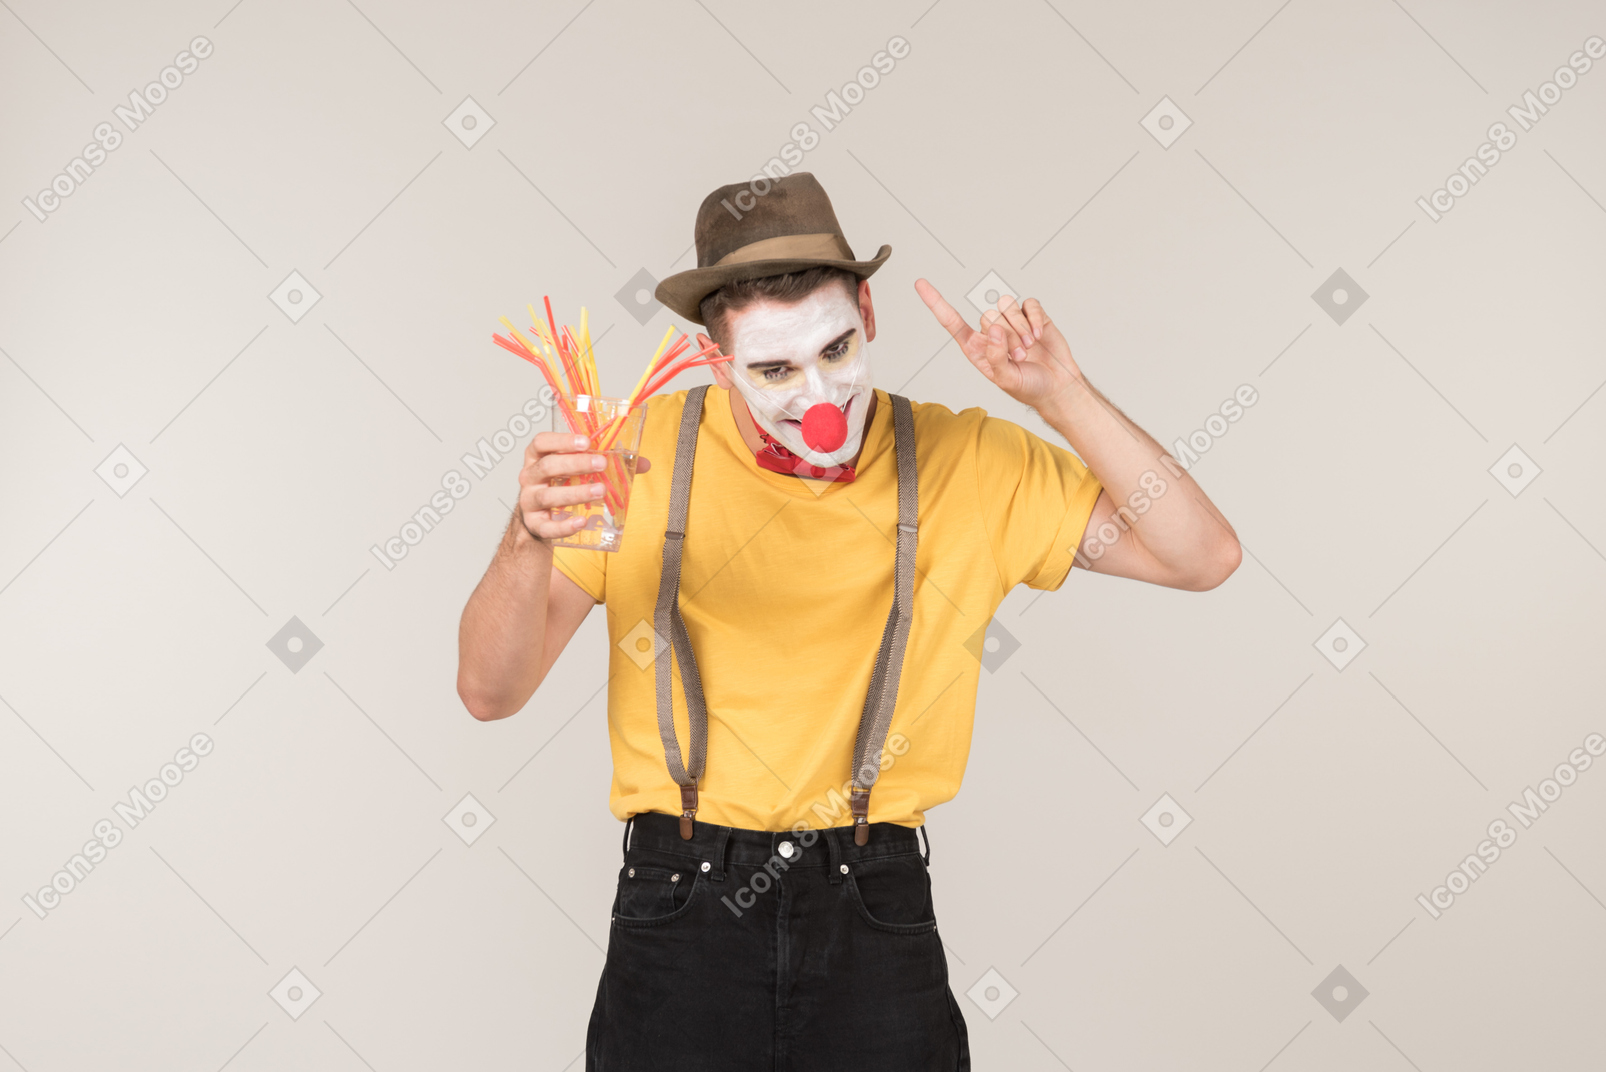 Male clown holding glass with plastic straws in it